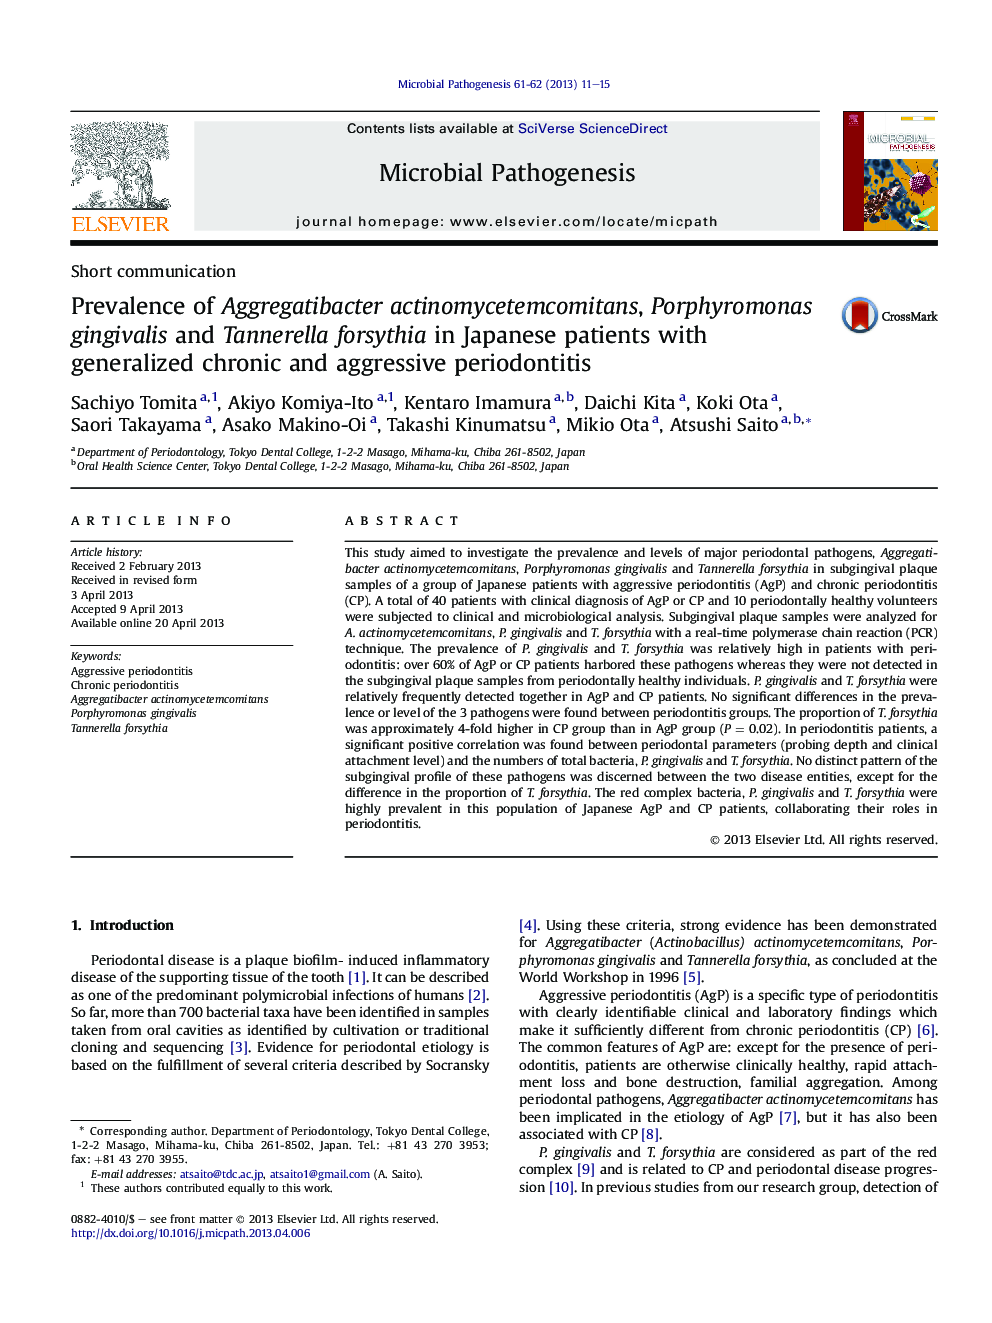 Prevalence of Aggregatibacter actinomycetemcomitans, Porphyromonas gingivalis and Tannerella forsythia in Japanese patients with generalized chronic and aggressive periodontitis